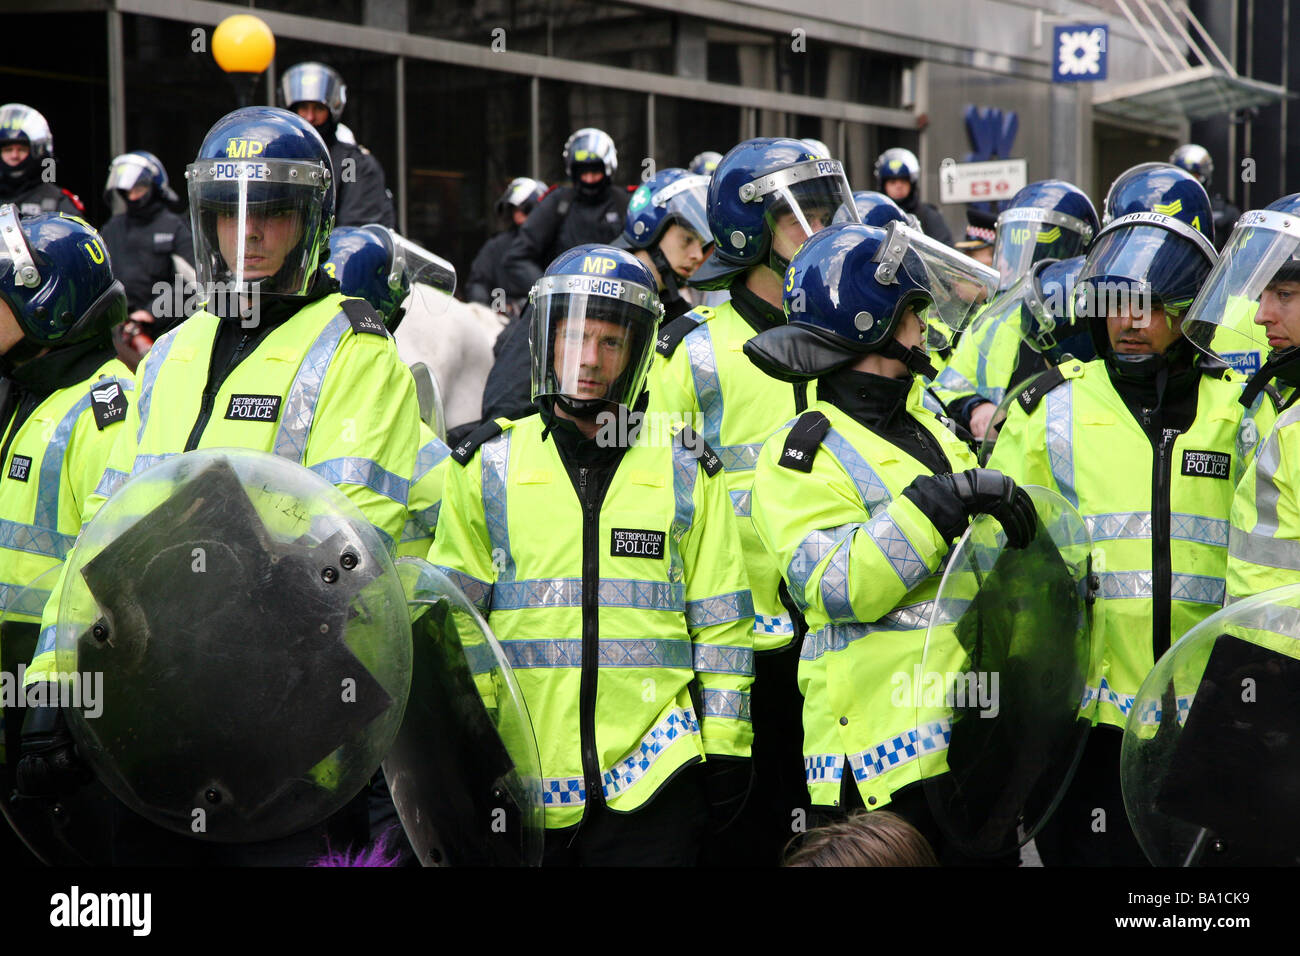 Riot police at the G20 protests in London Stock Photo